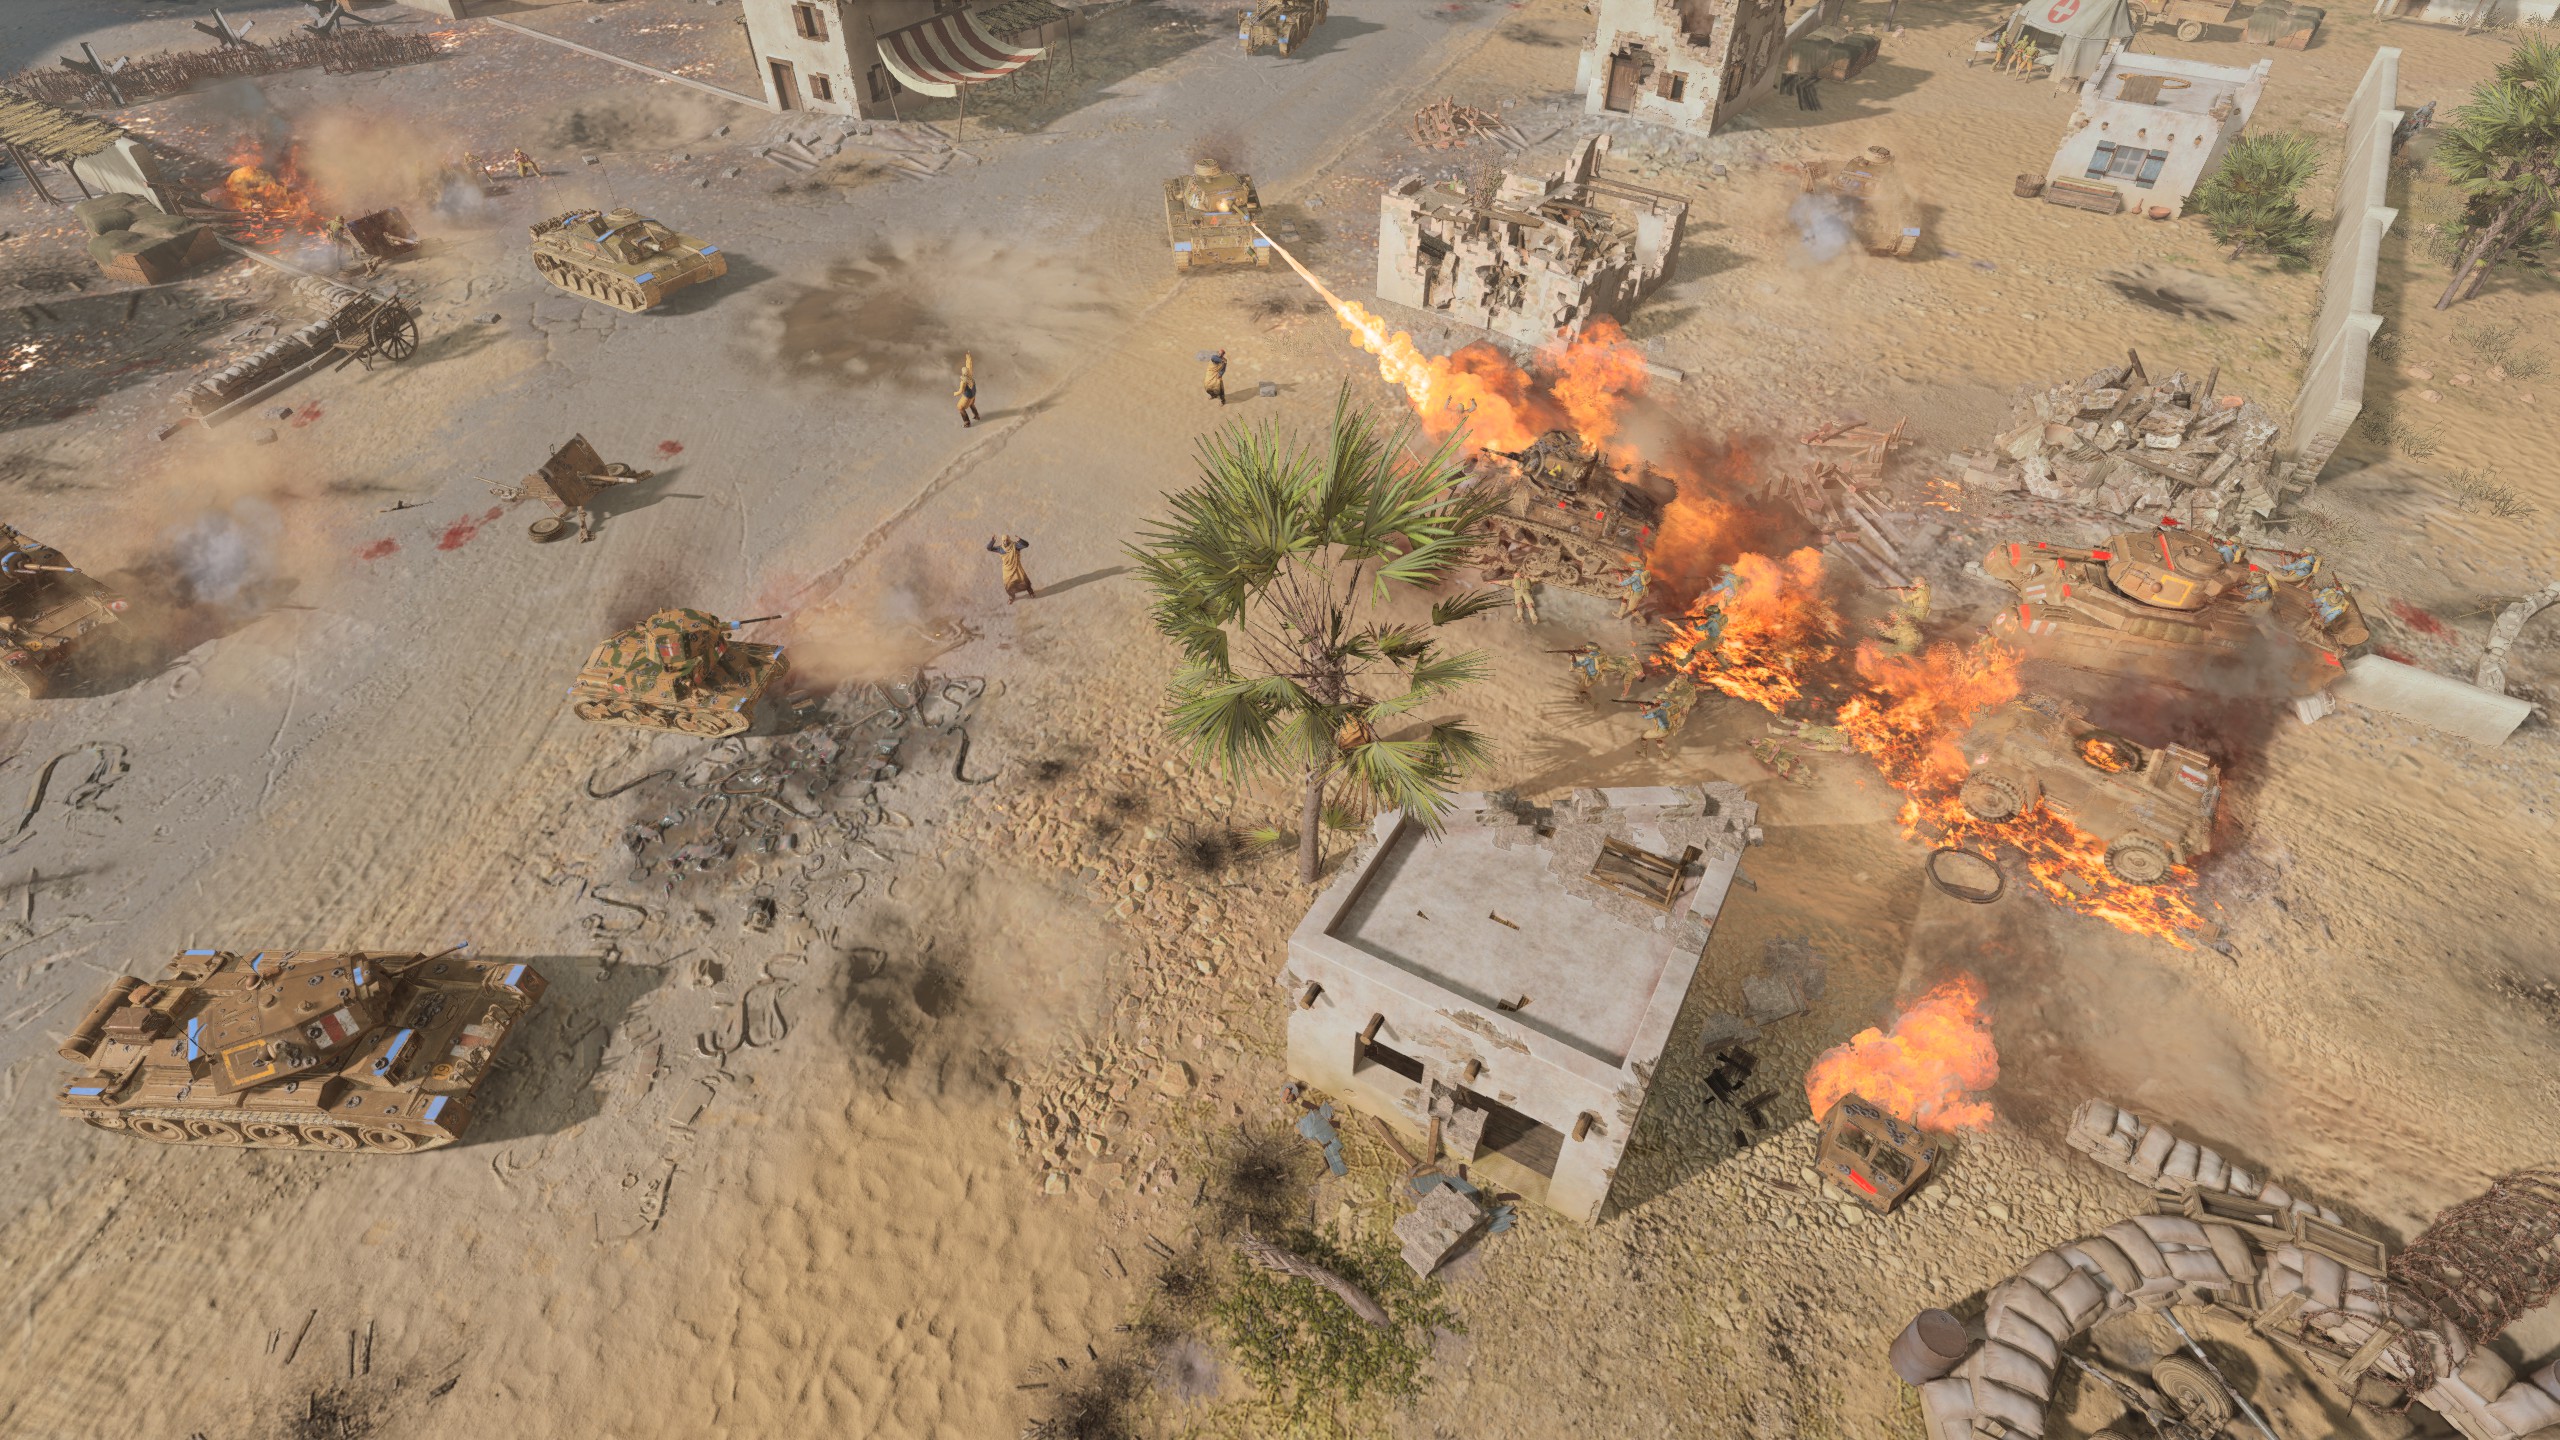 Company of Heroes 3 battle in a North African village